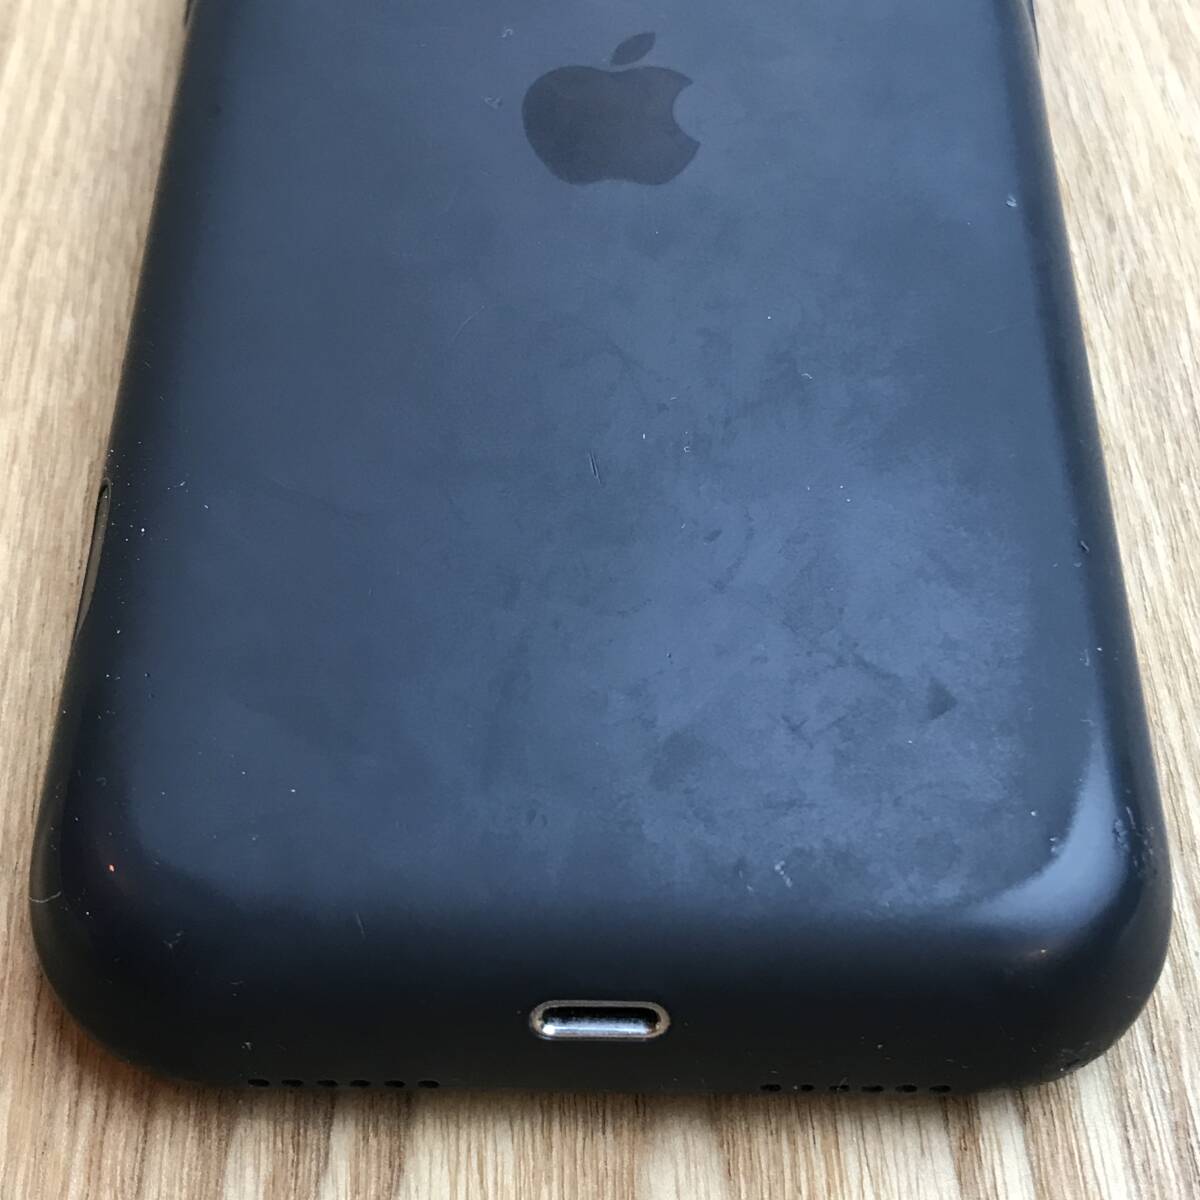 APPLE純正 iPhone 11 Smart Battery Case with Wireless Charging スマートバッテリーケース ワイヤレスチャージング ブラックの画像5